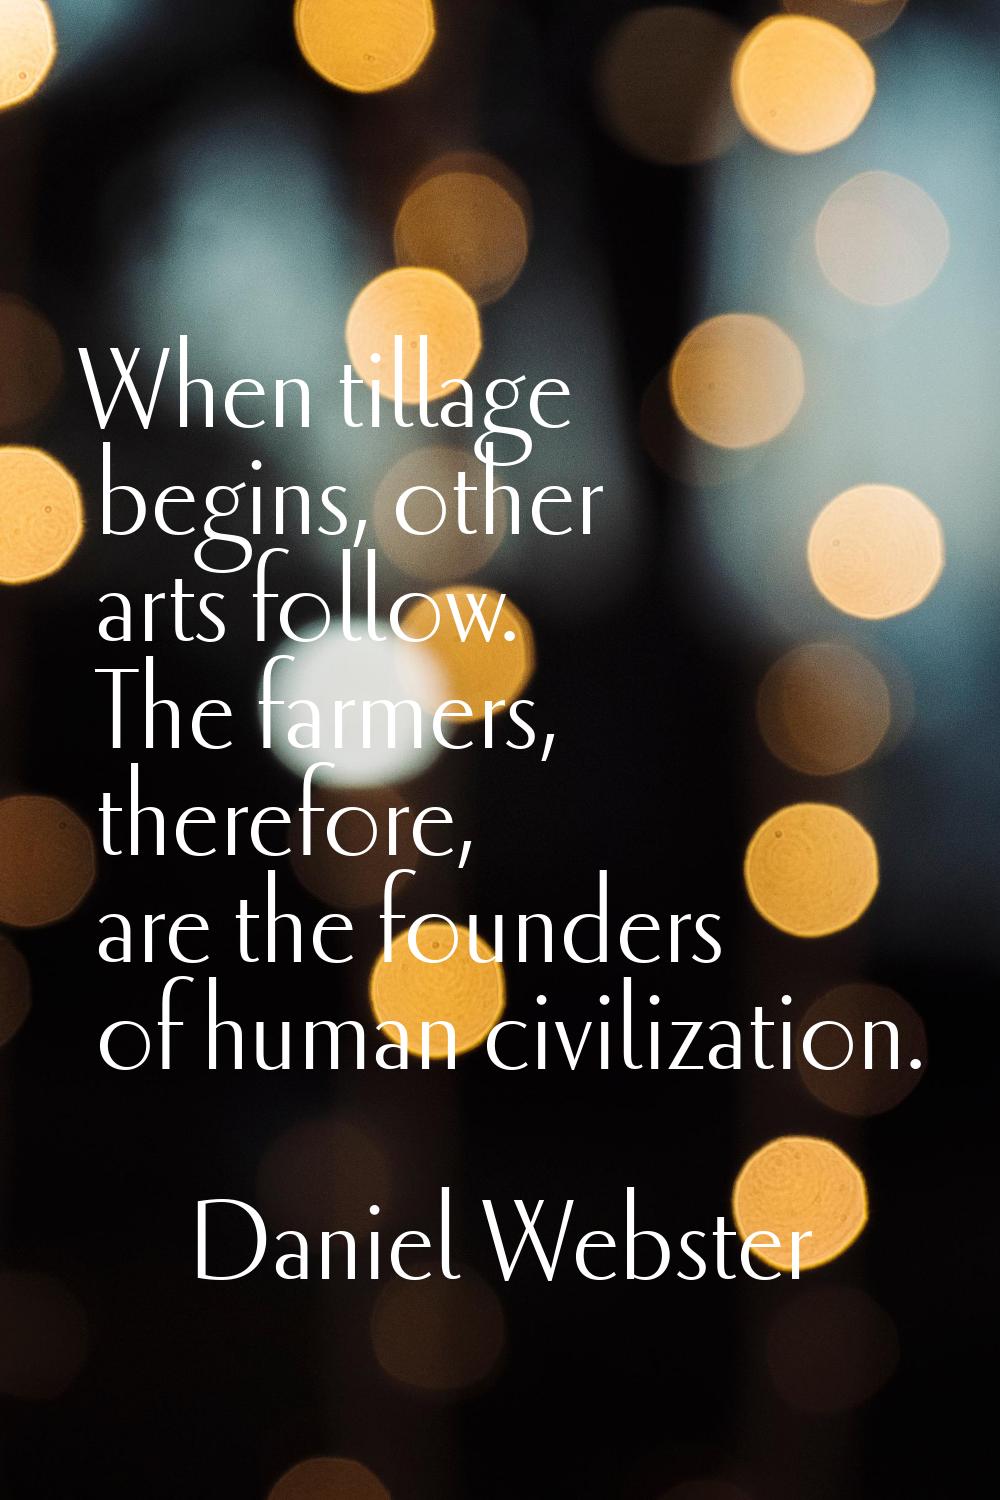 When tillage begins, other arts follow. The farmers, therefore, are the founders of human civilizat